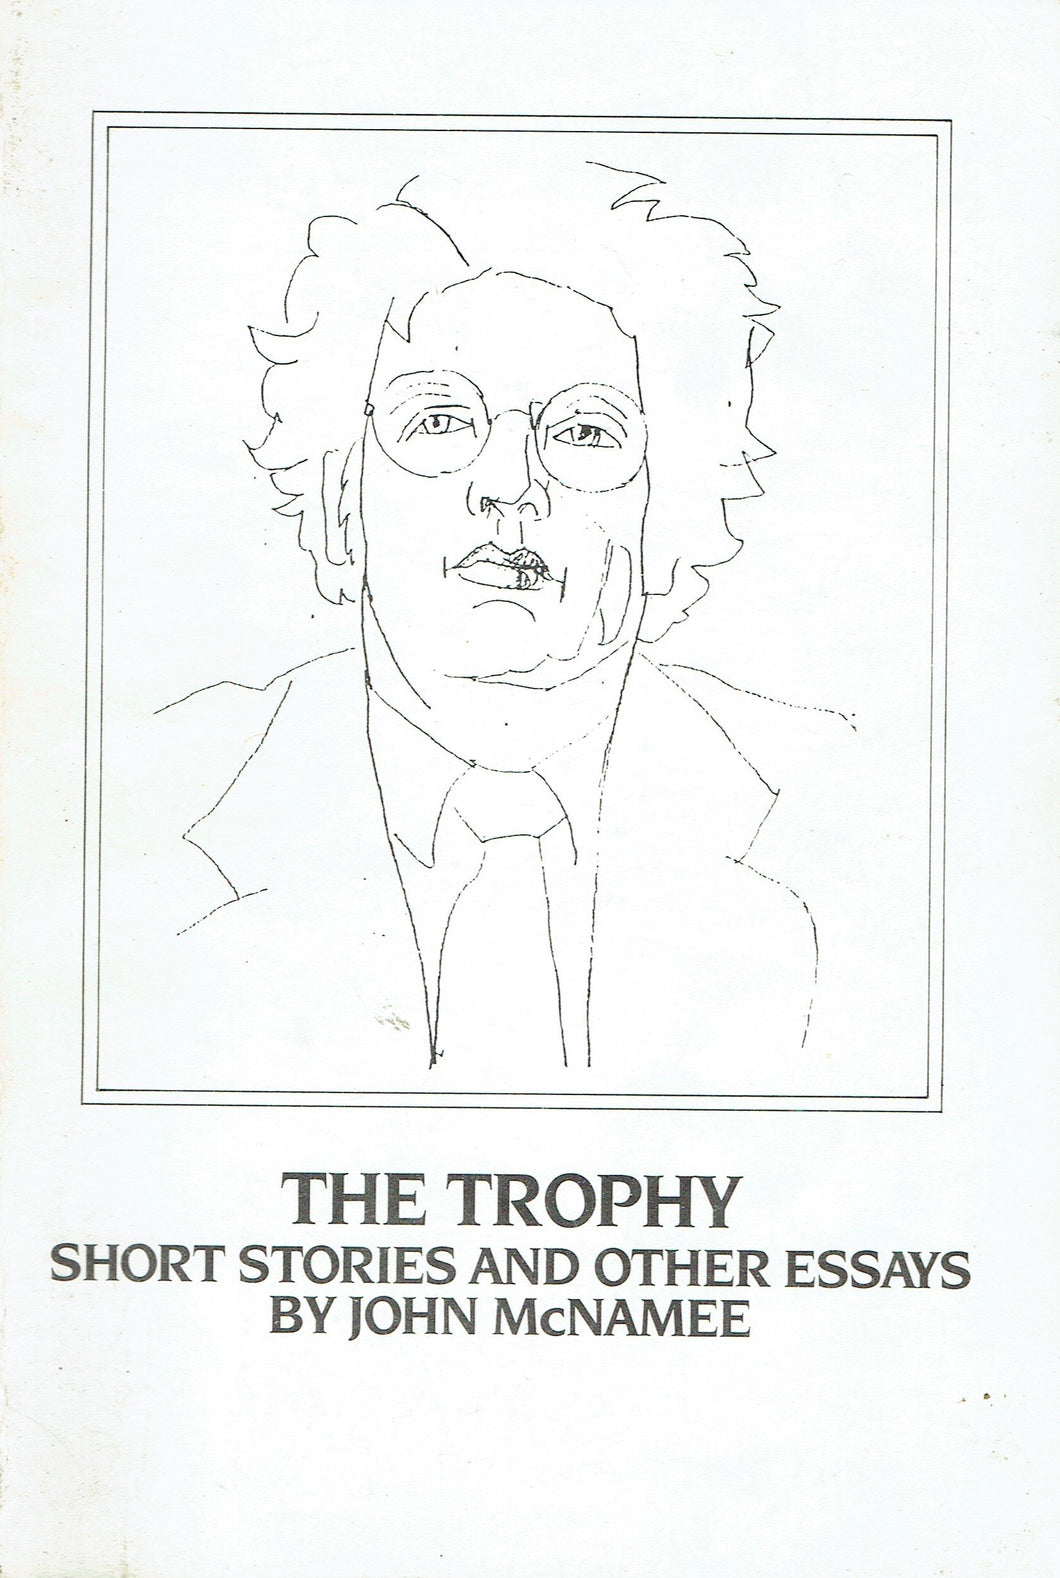 The trophy: Short stories and other essays